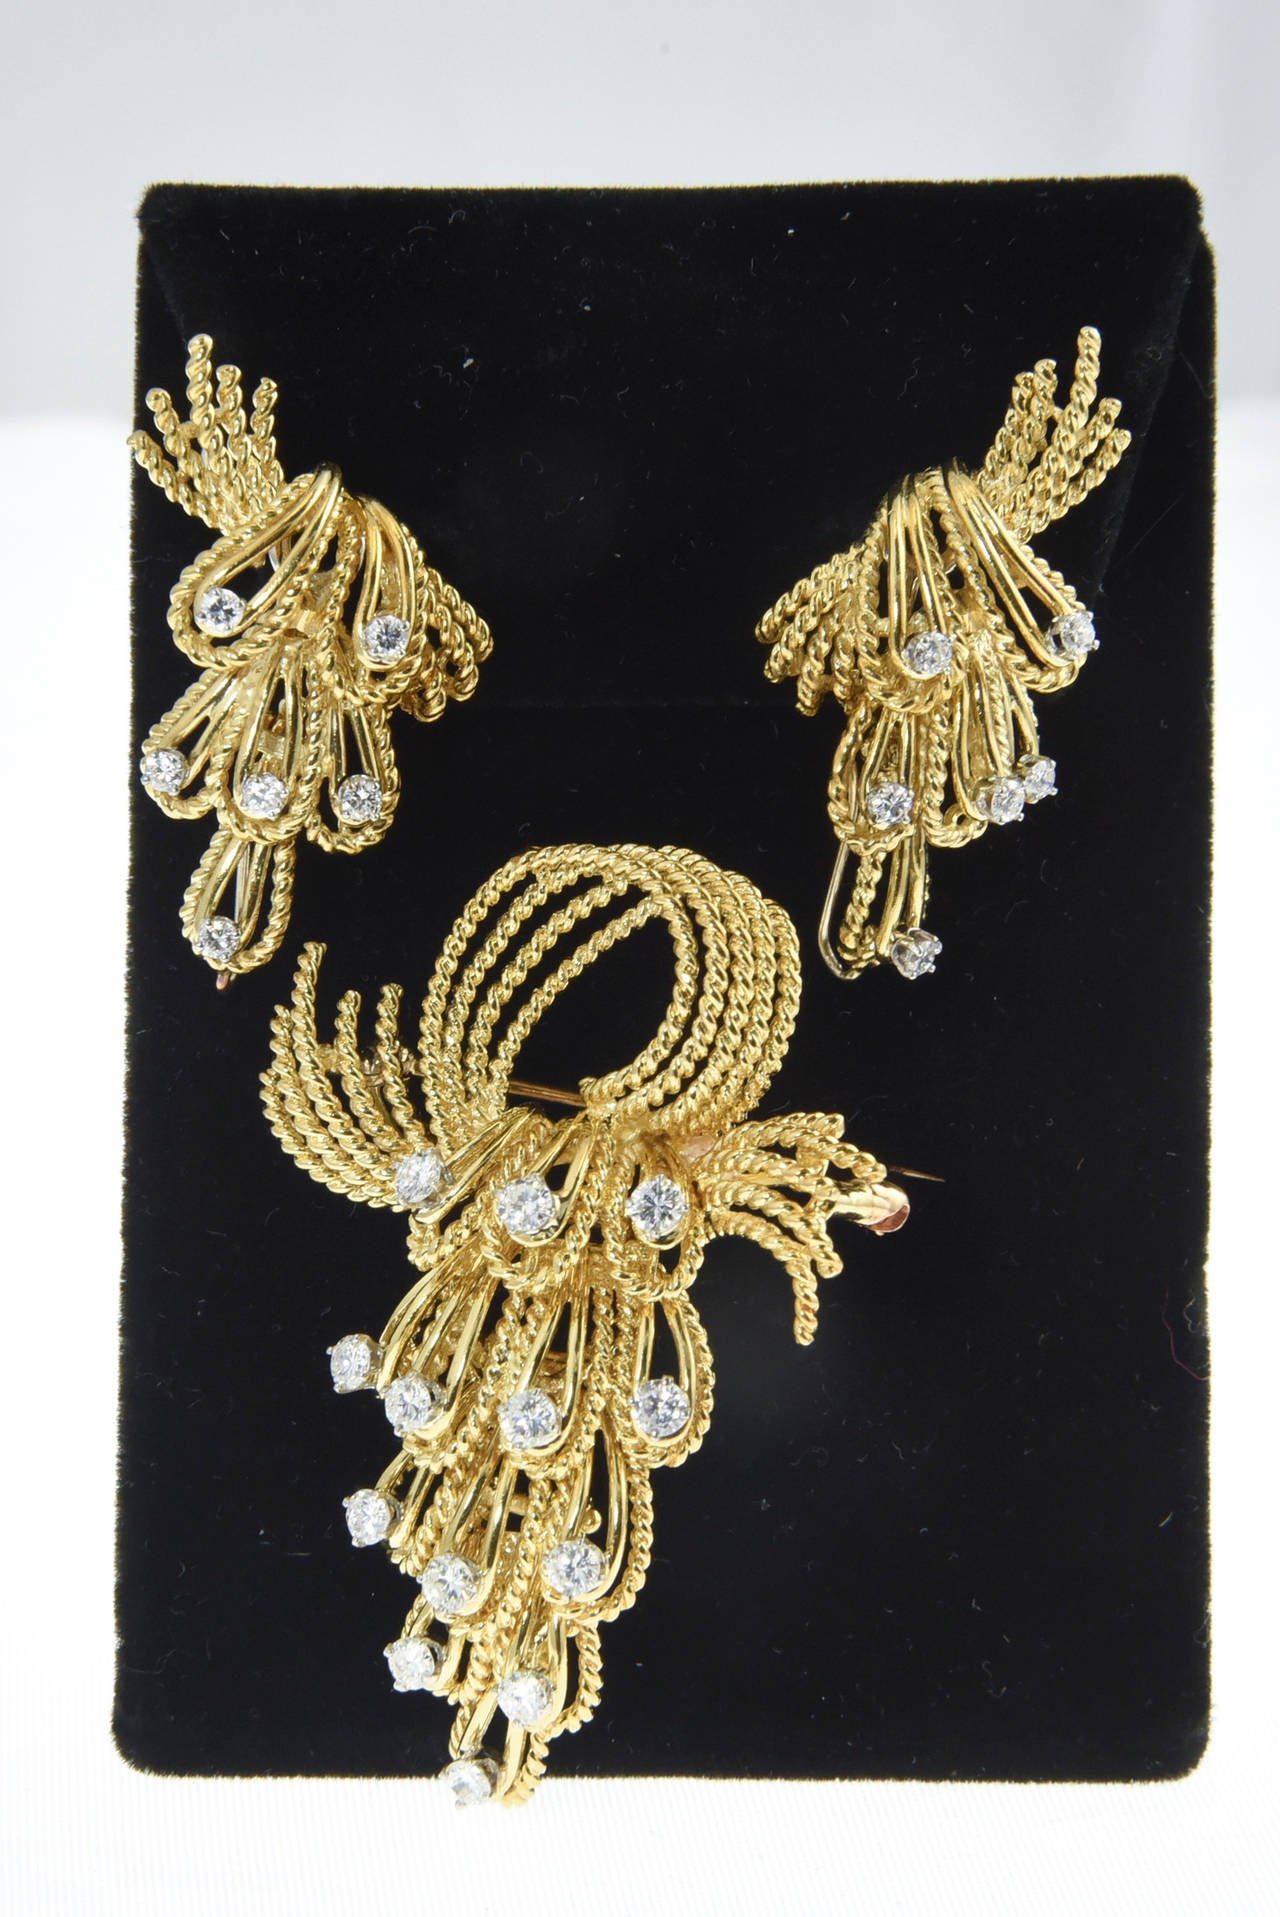 Beautifully made brooch and earrings with cascading diamonds amongst twisted and shiny 18k gold loops.

The earrings are clip ons (NO post).  They have a wire on the bottom that you can drop something from for example a South Seas Pearl. 